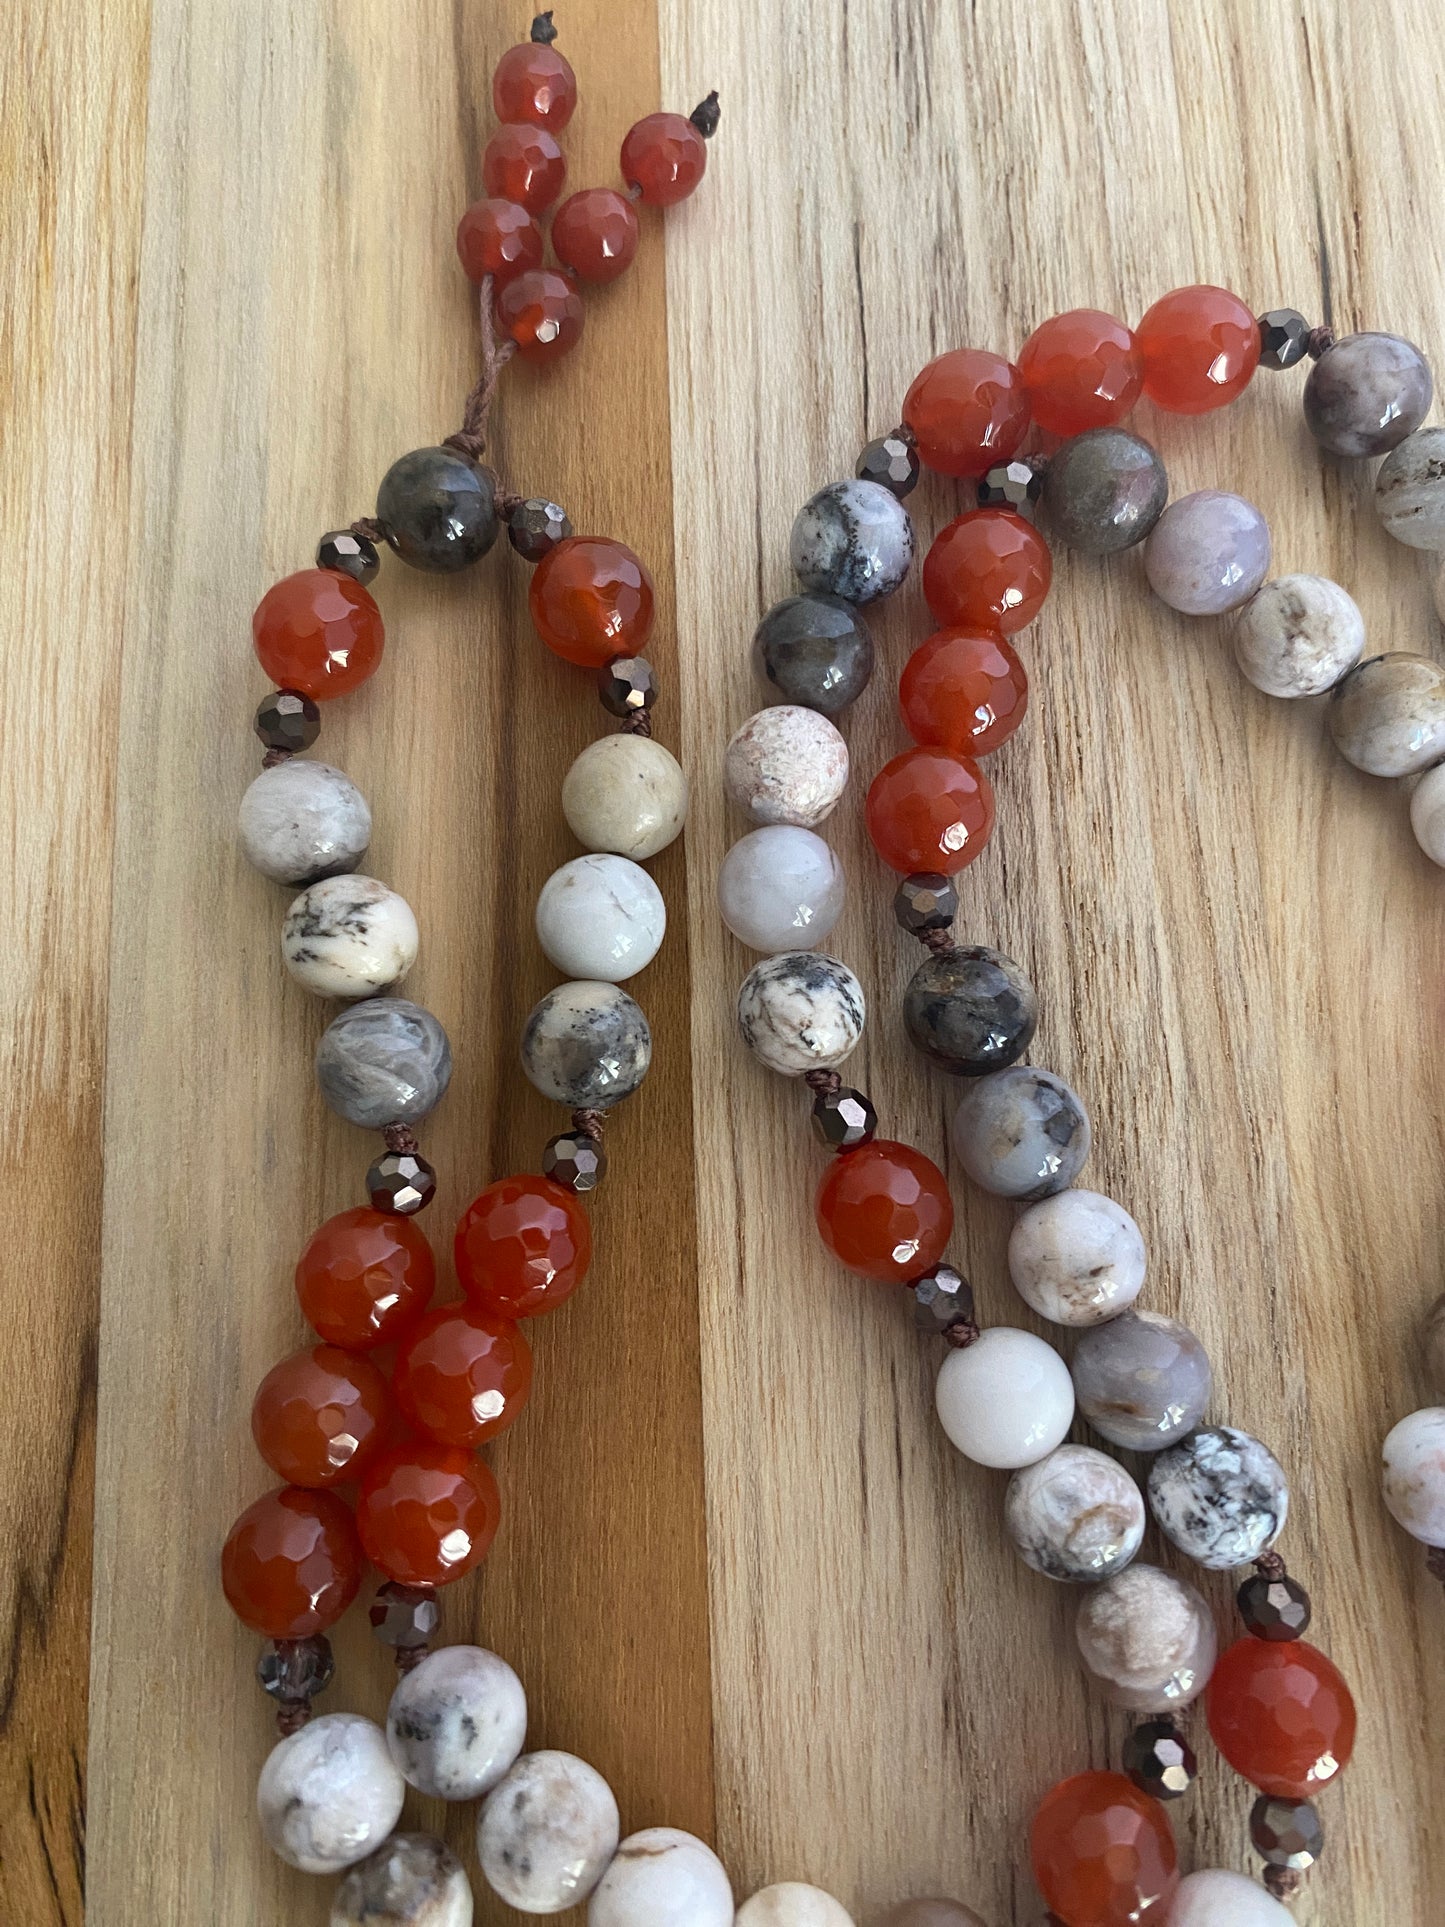 26" Long Dendritic Agate Clay Goddess Pendant Beaded Necklace with Carnelian & Agate Beads - My Urban Gems